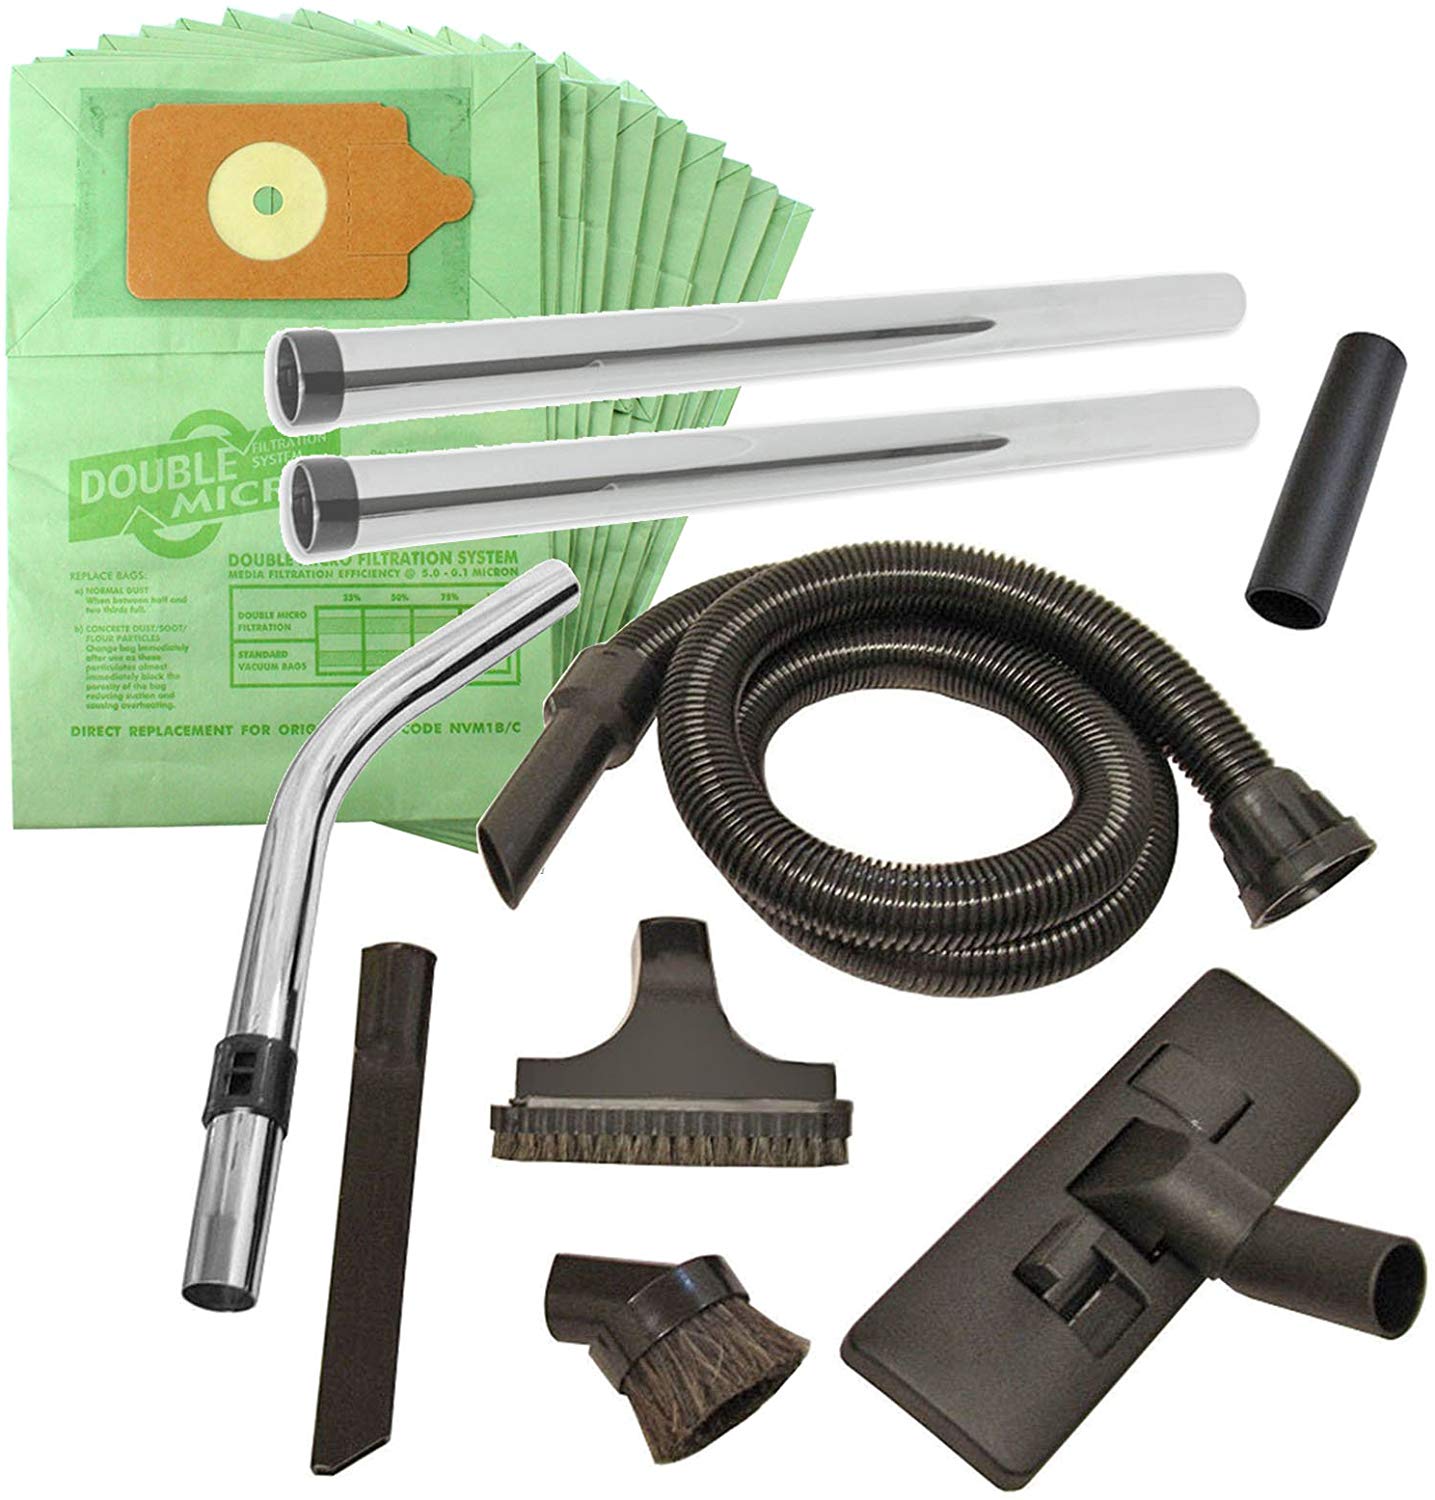 SPARES2GO Complete Wet & Dry 2.5m Long Hose, Rods, Floor & Mini Tool Kit for Numatic Henry Hetty James Vacuum Cleaner (Includes 10 x Dust Bags)